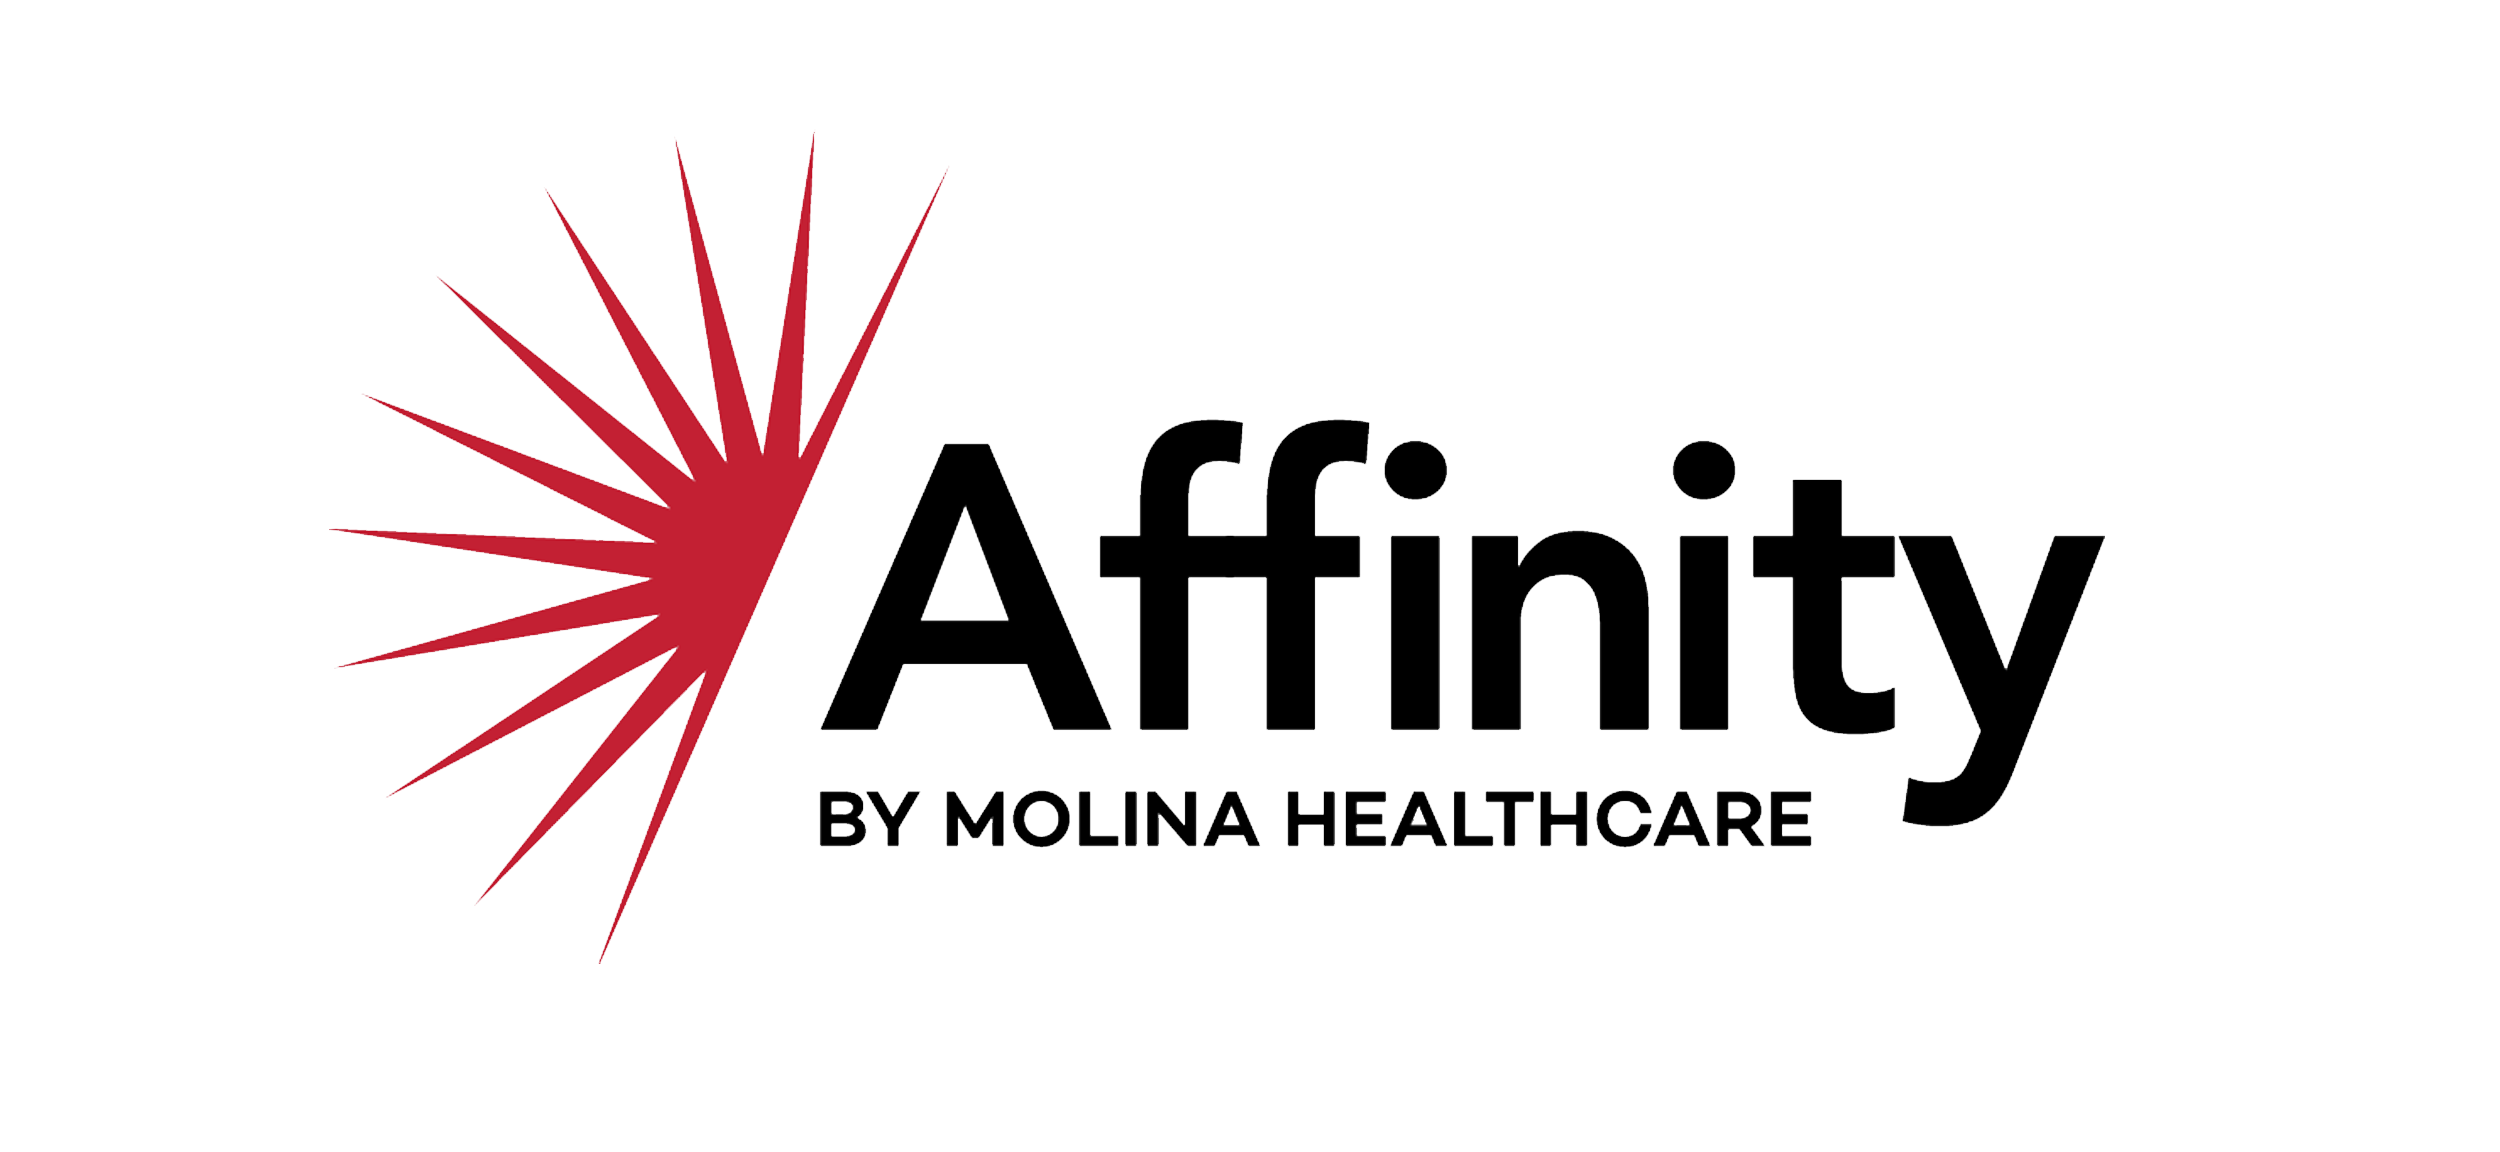 Affinity Health Care